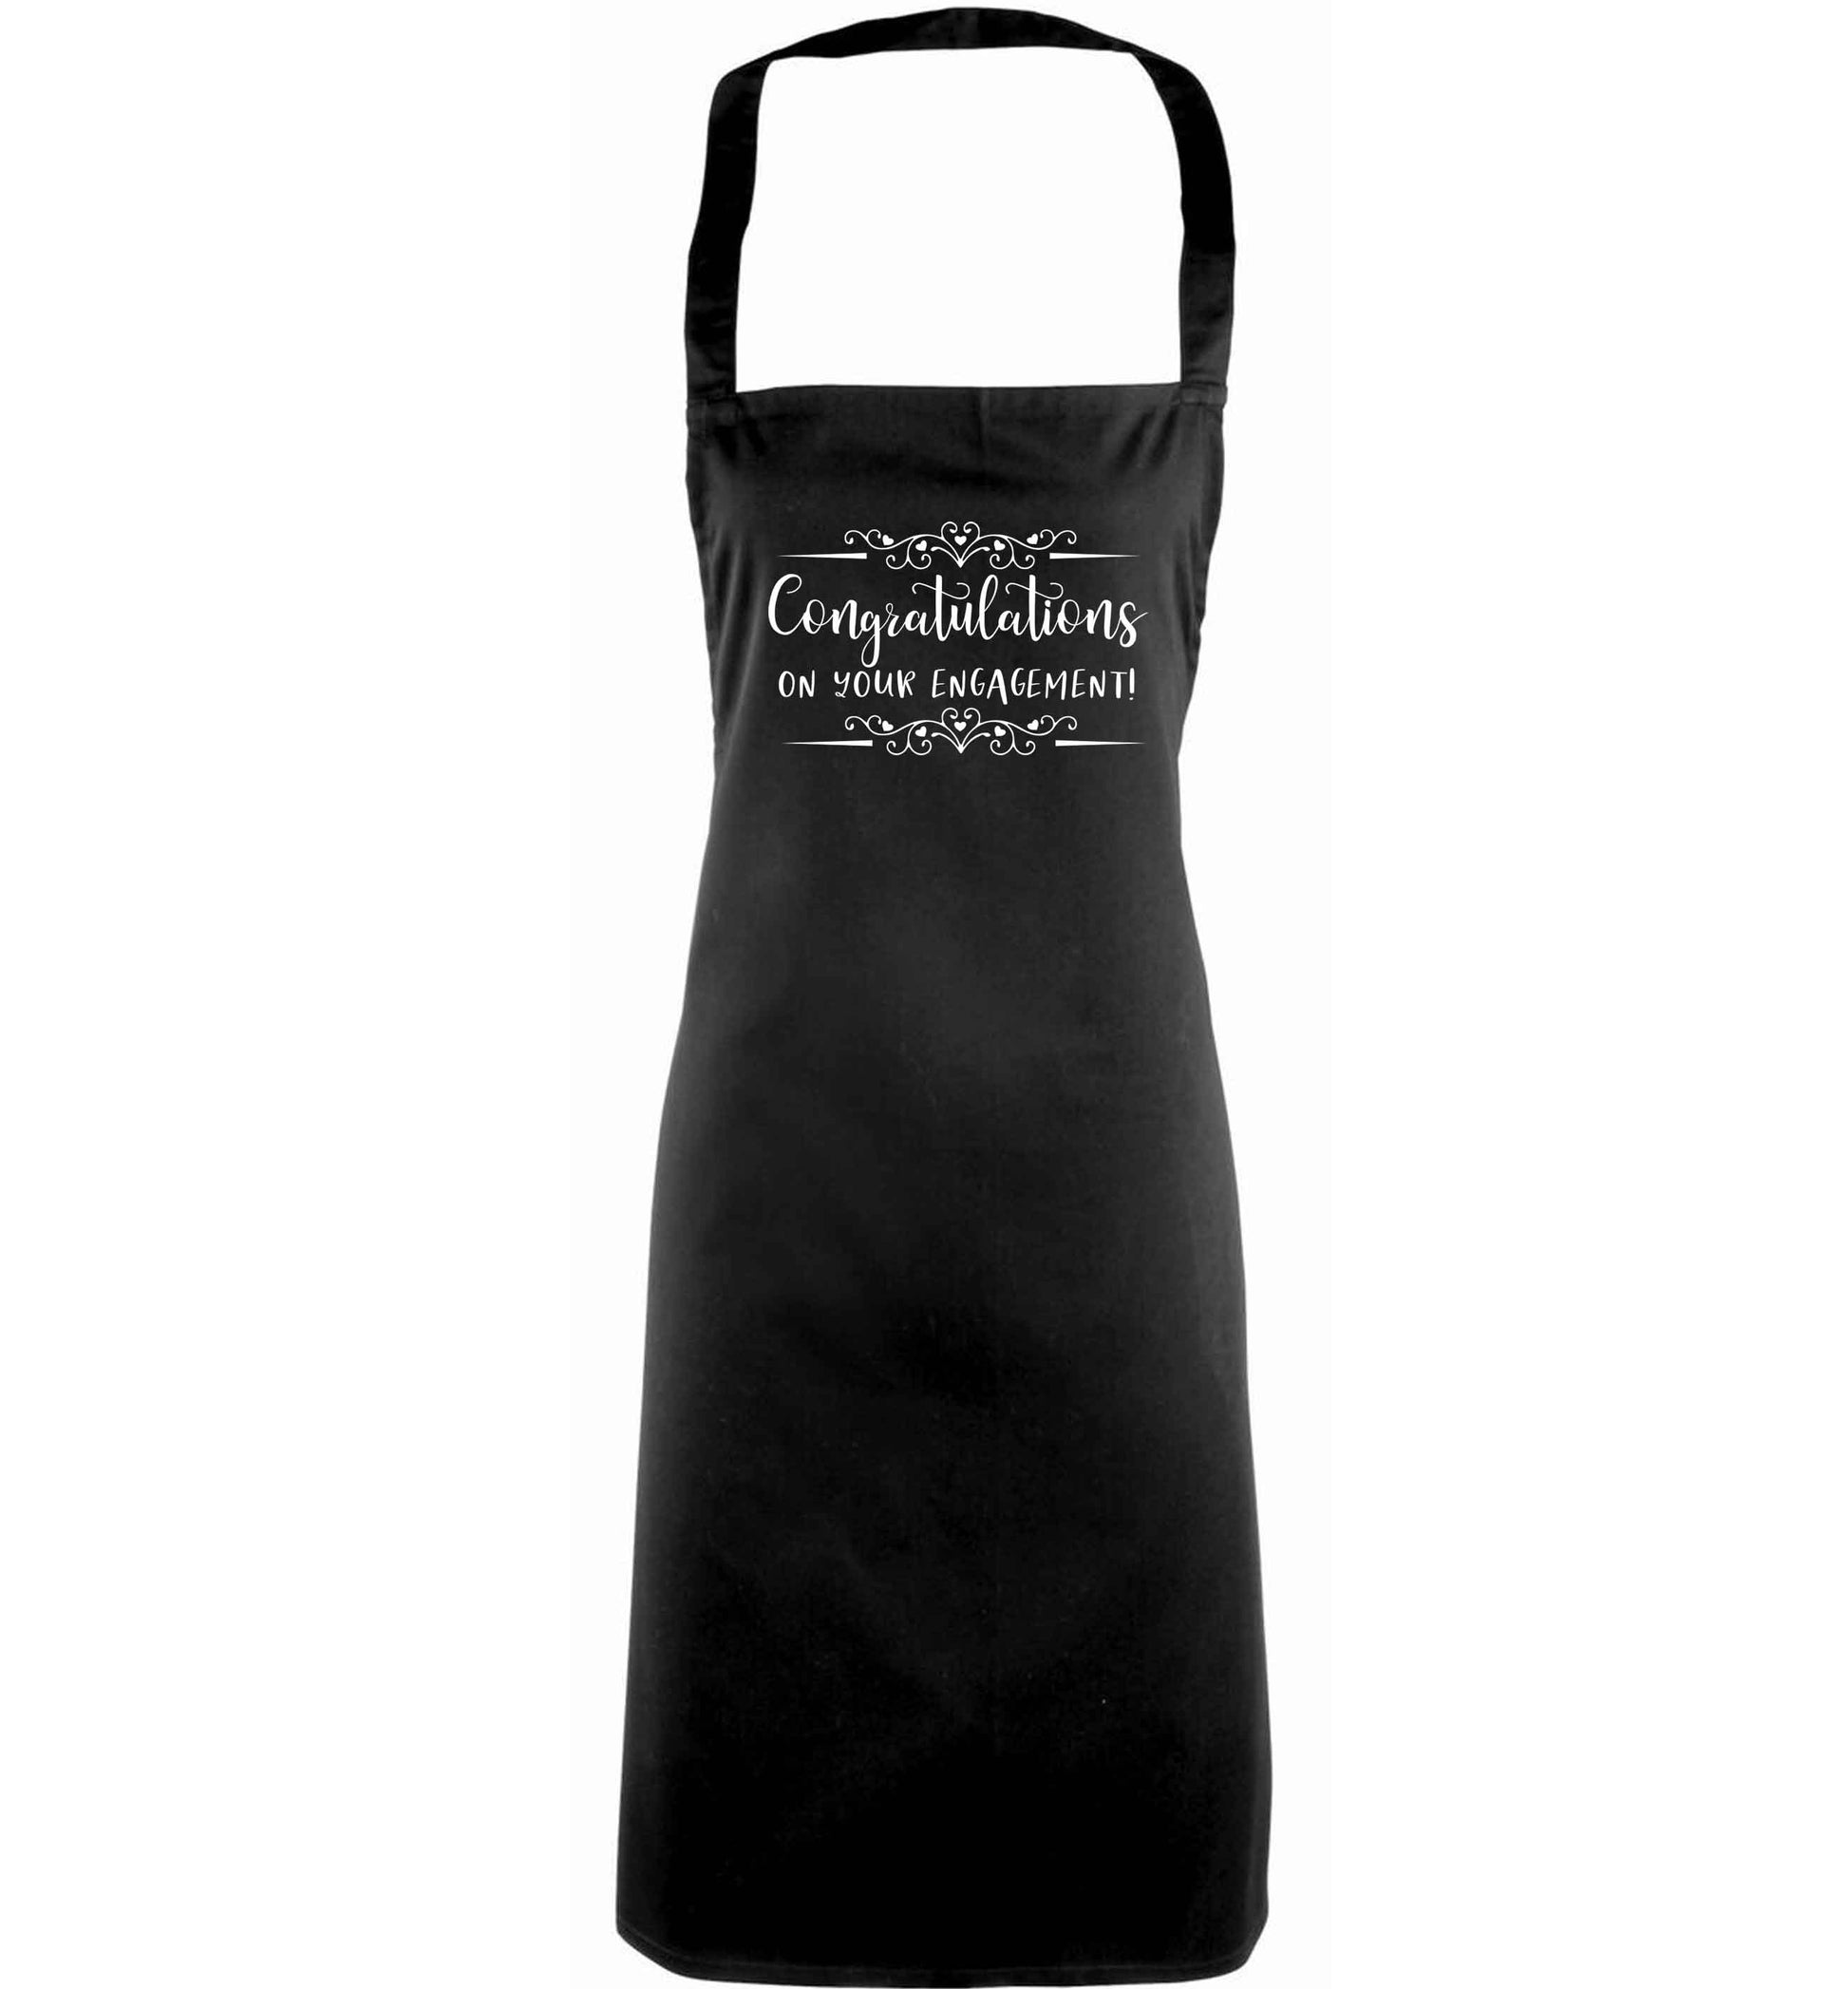 Congratulations on your engagement adults black apron